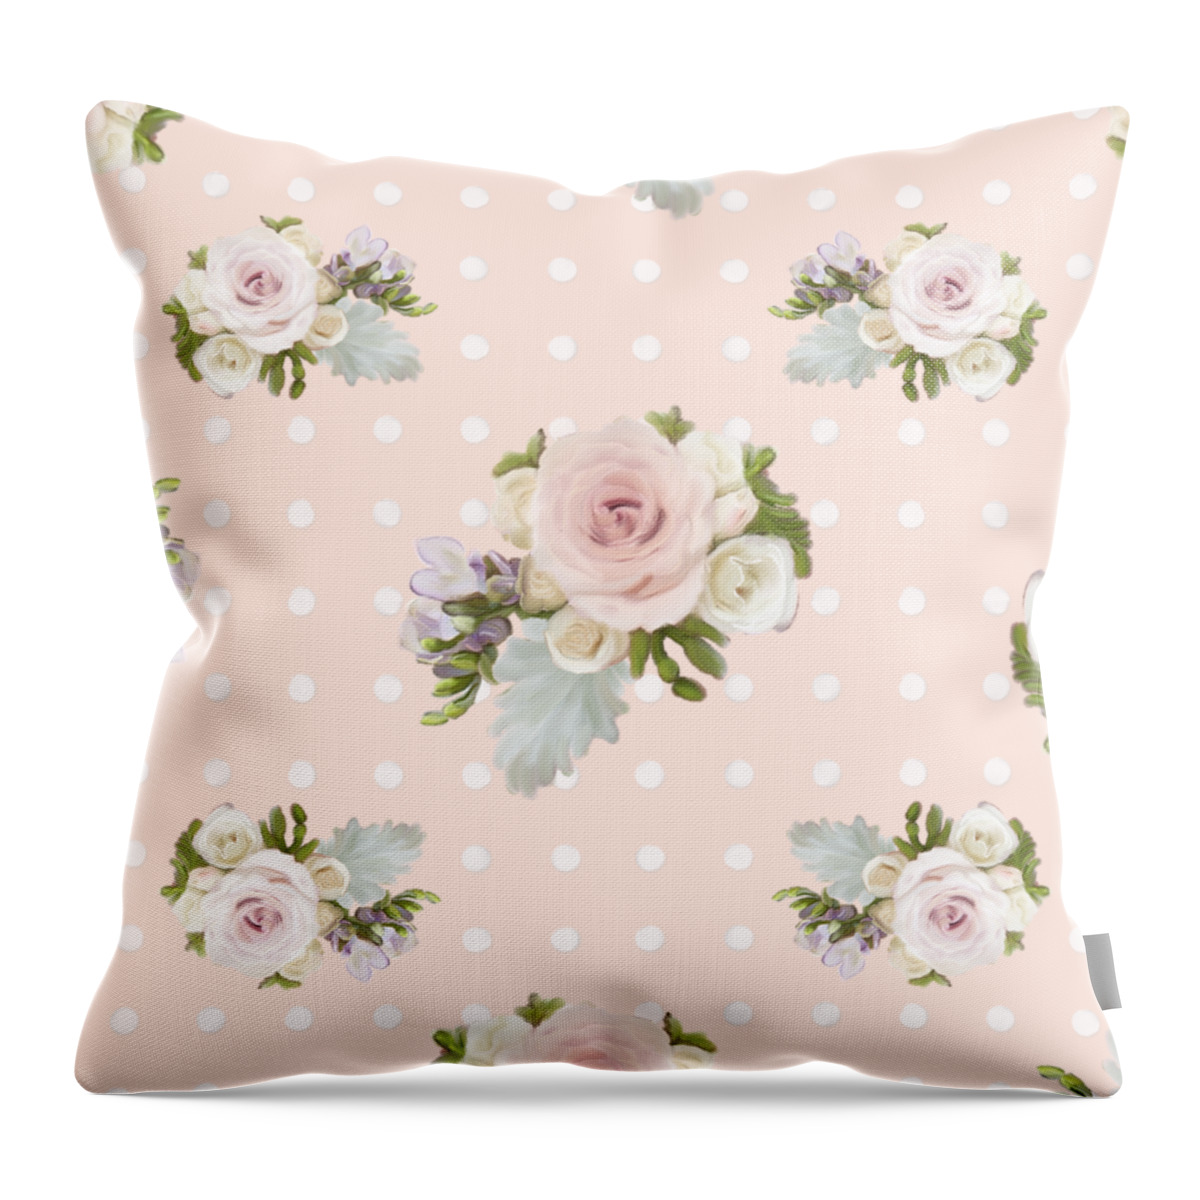 Blush Pink Throw Pillow featuring the painting Blush Pink Floral Rose Cluster w Dot Bedding Home Decor Art by Audrey Jeanne Roberts